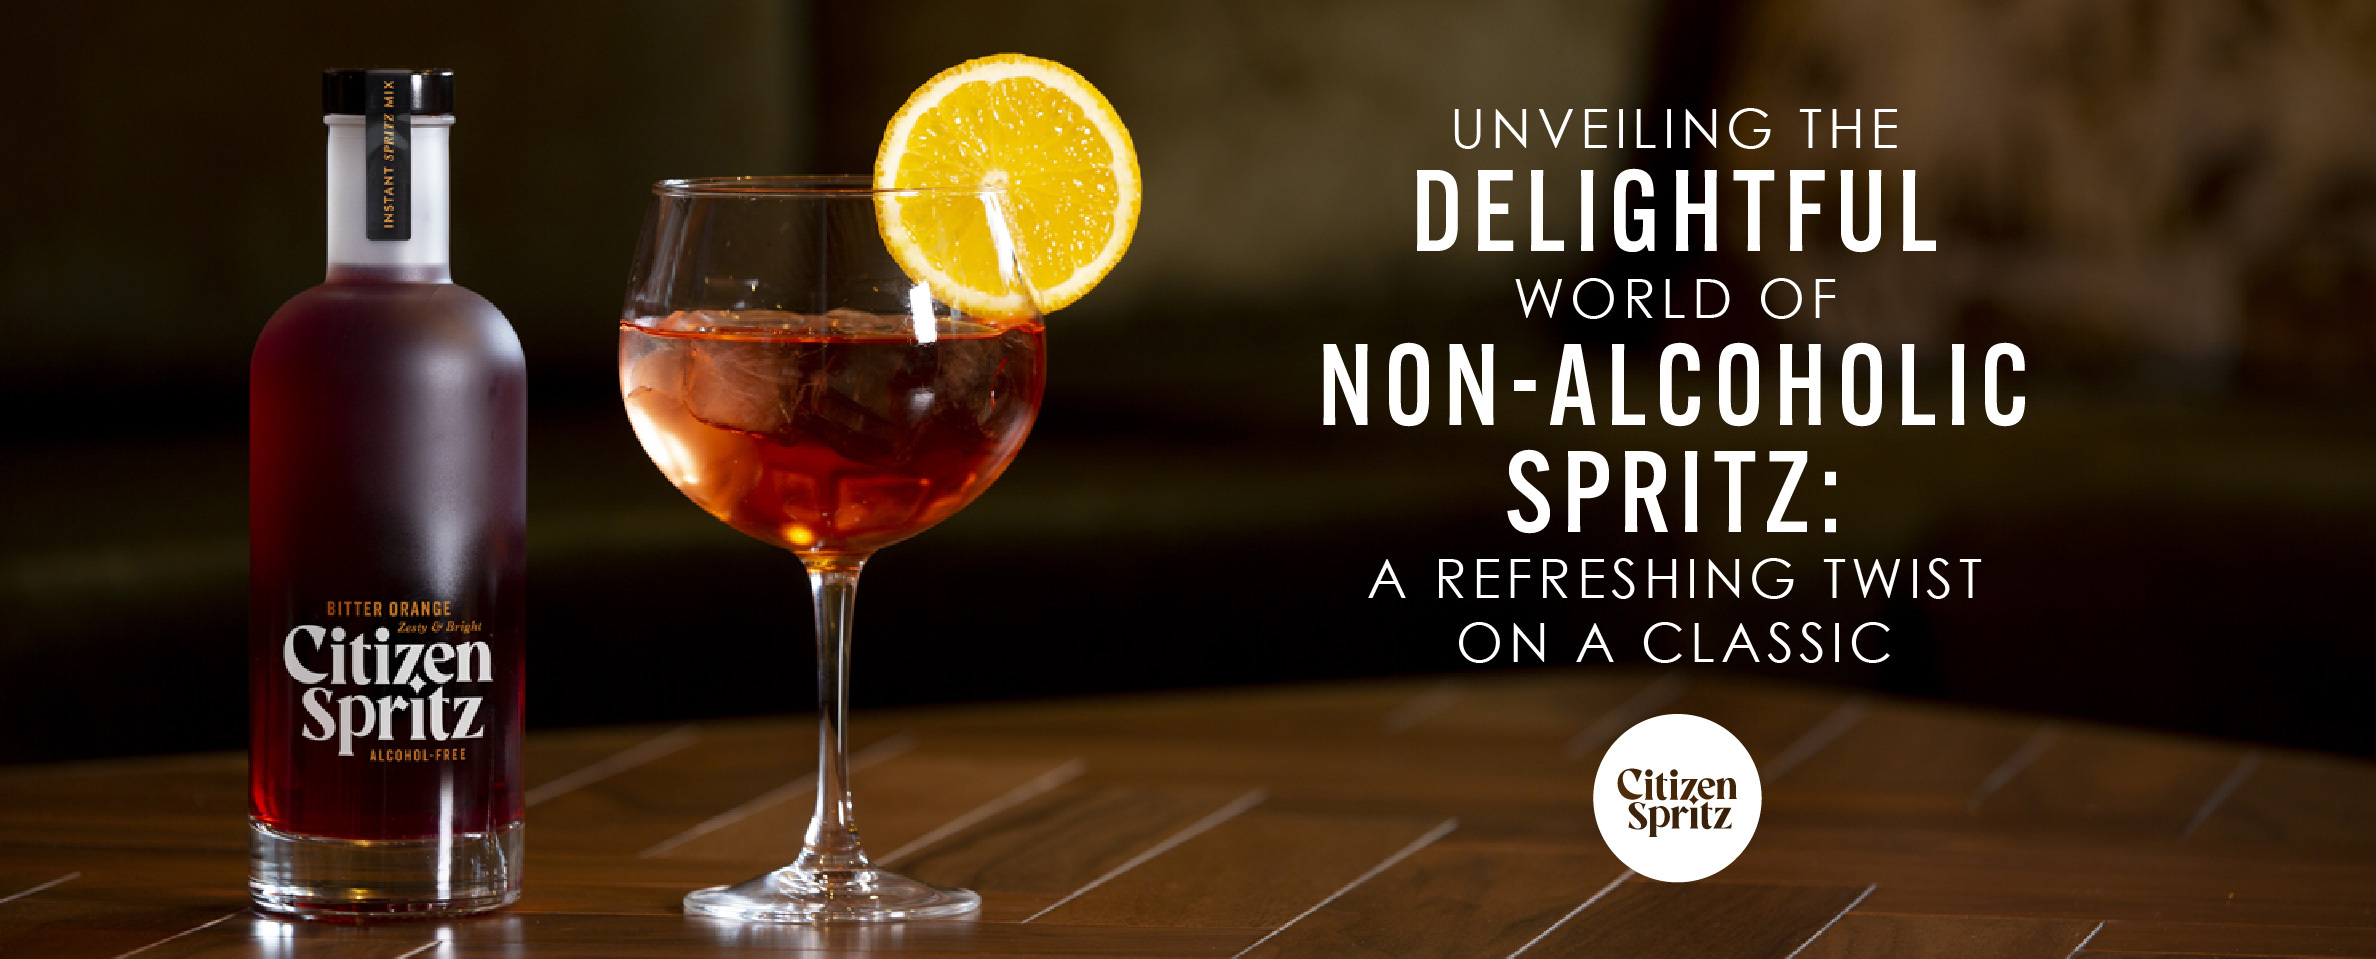 Unveiling the Delightful World of Non-Alcoholic Spritz: A Refreshing Twist on a Classic